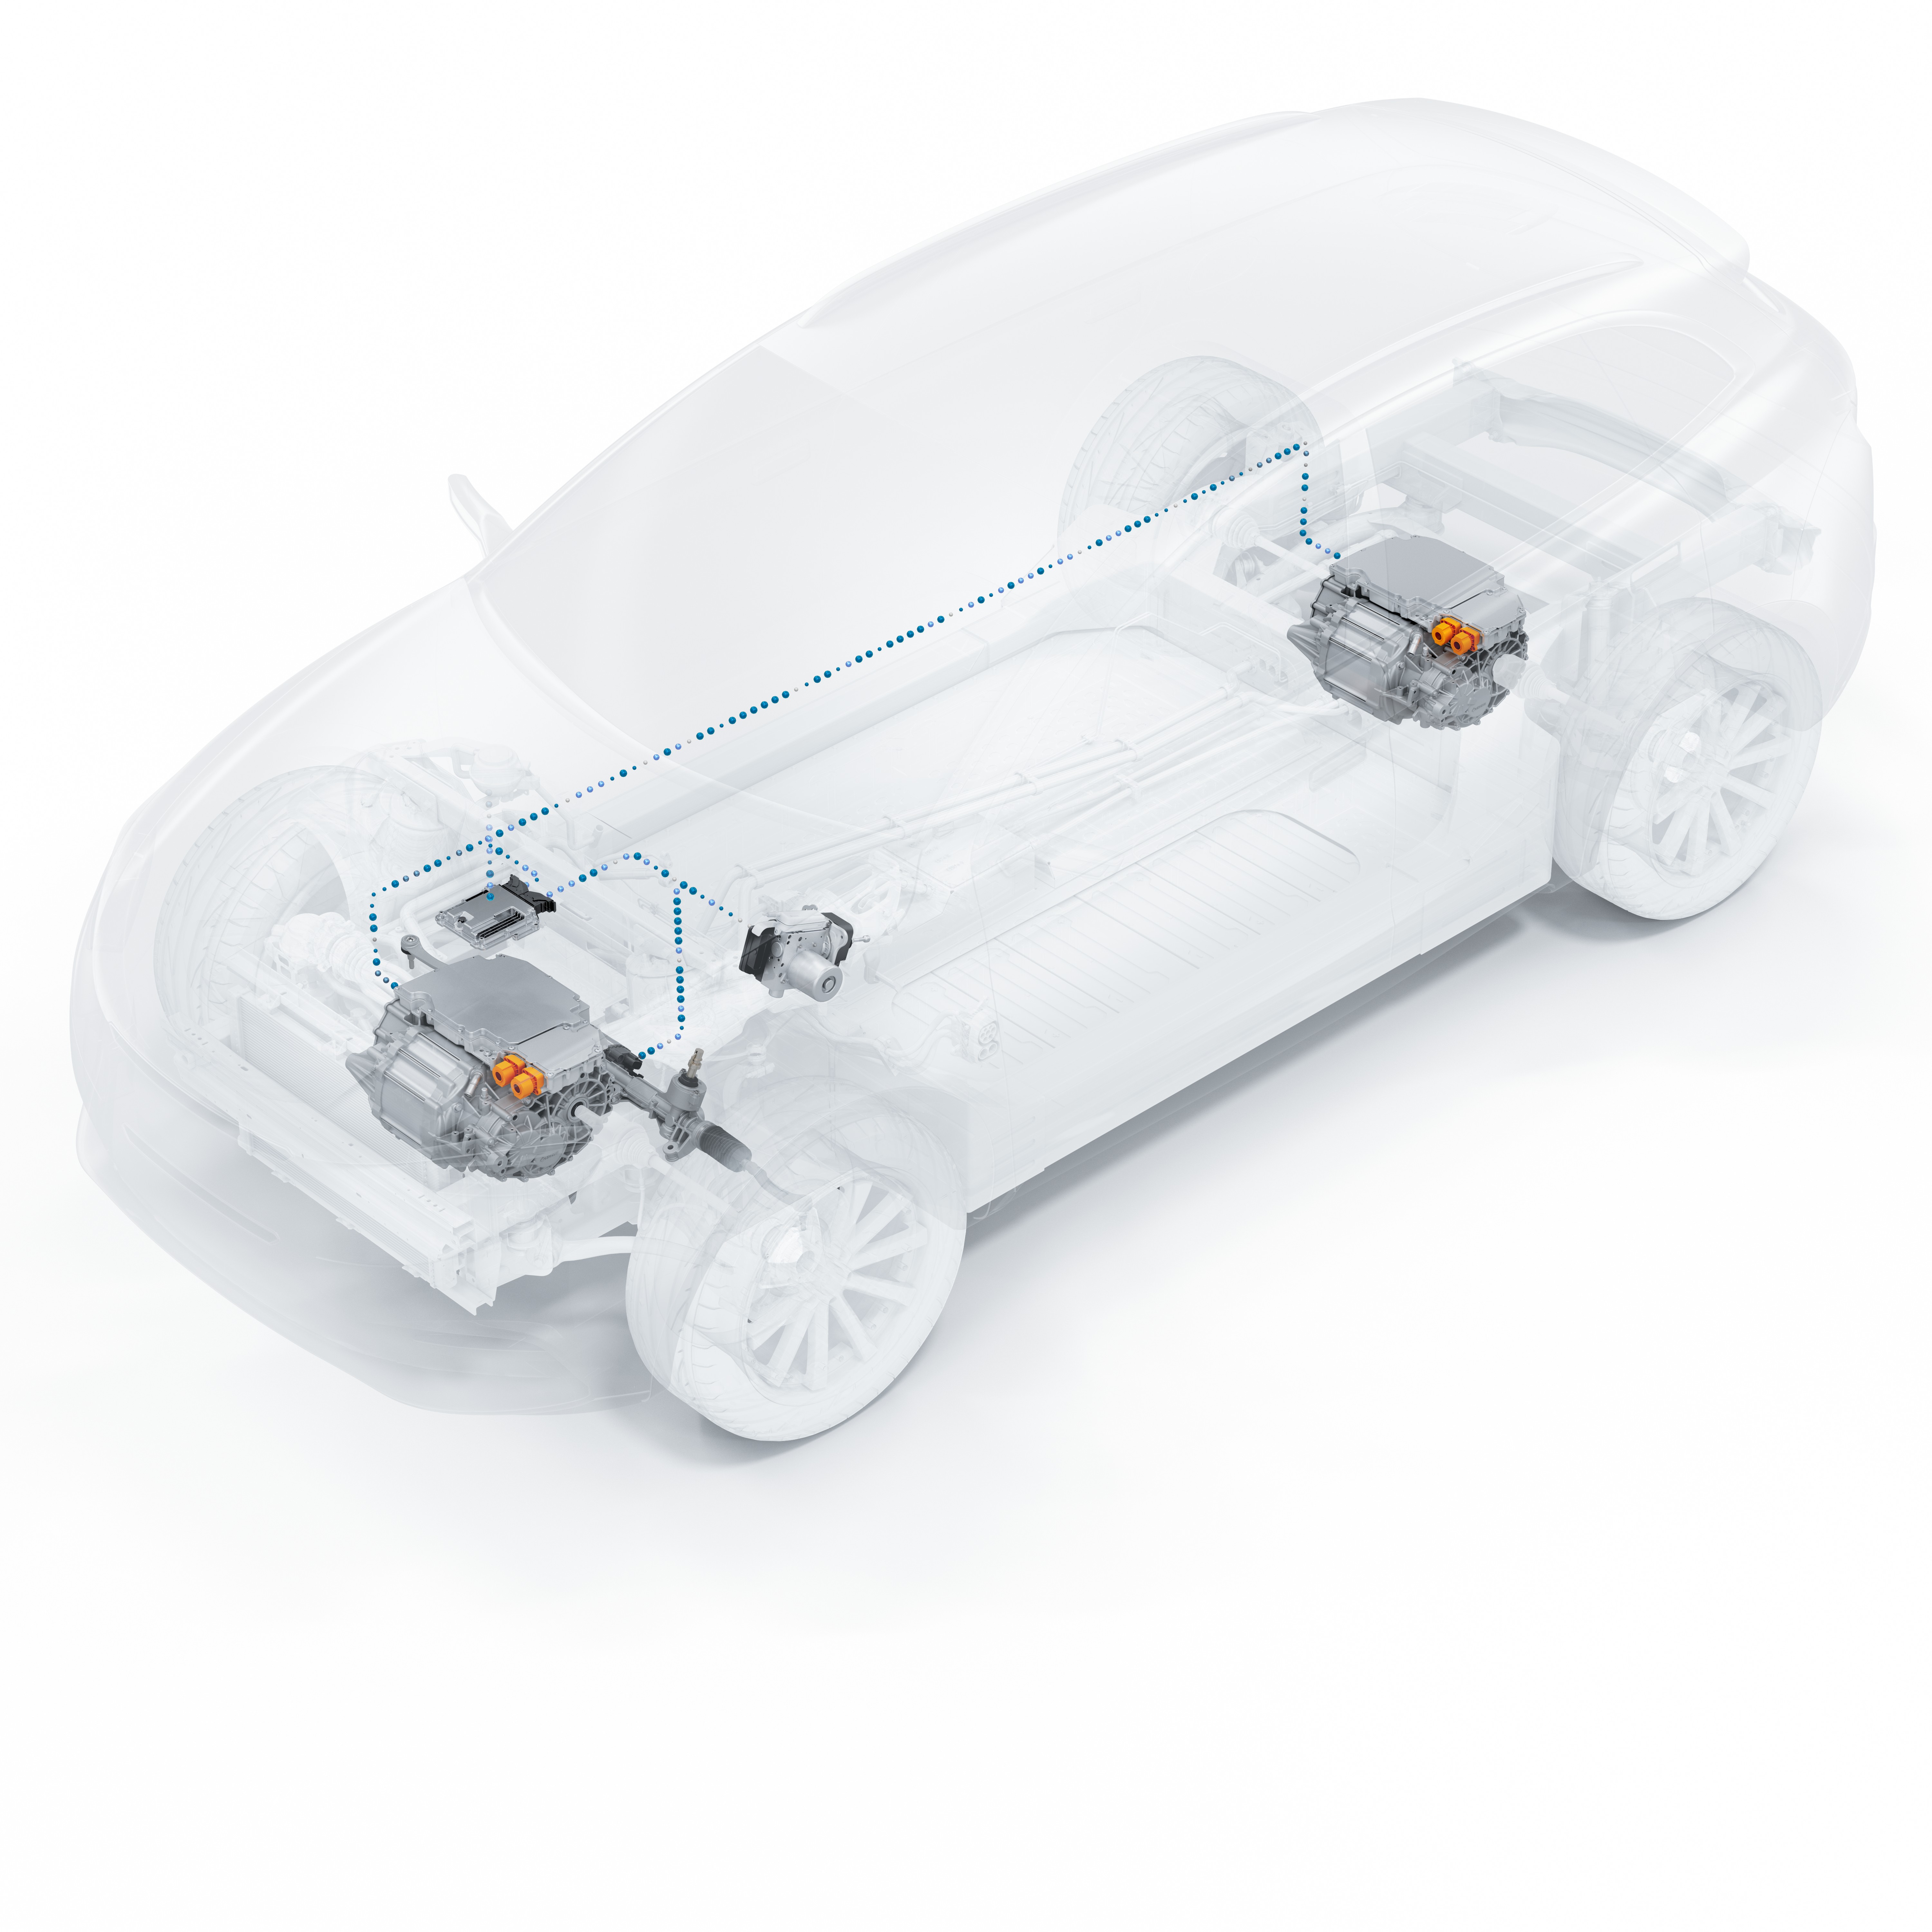 Pre-integrated system solutions for electric vehicles